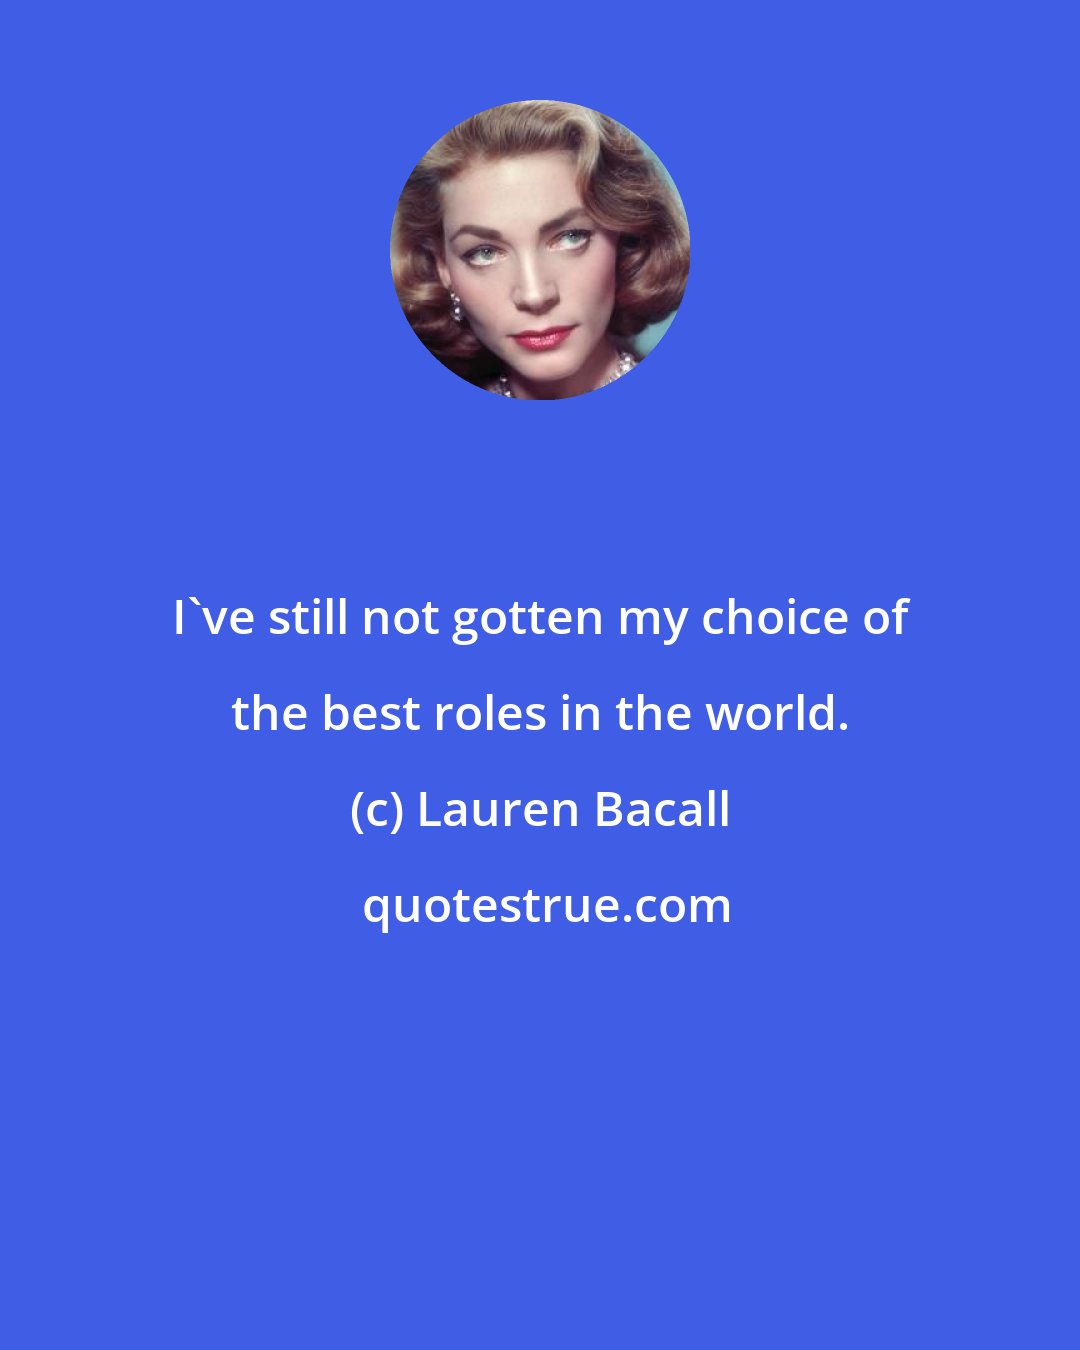 Lauren Bacall: I've still not gotten my choice of the best roles in the world.